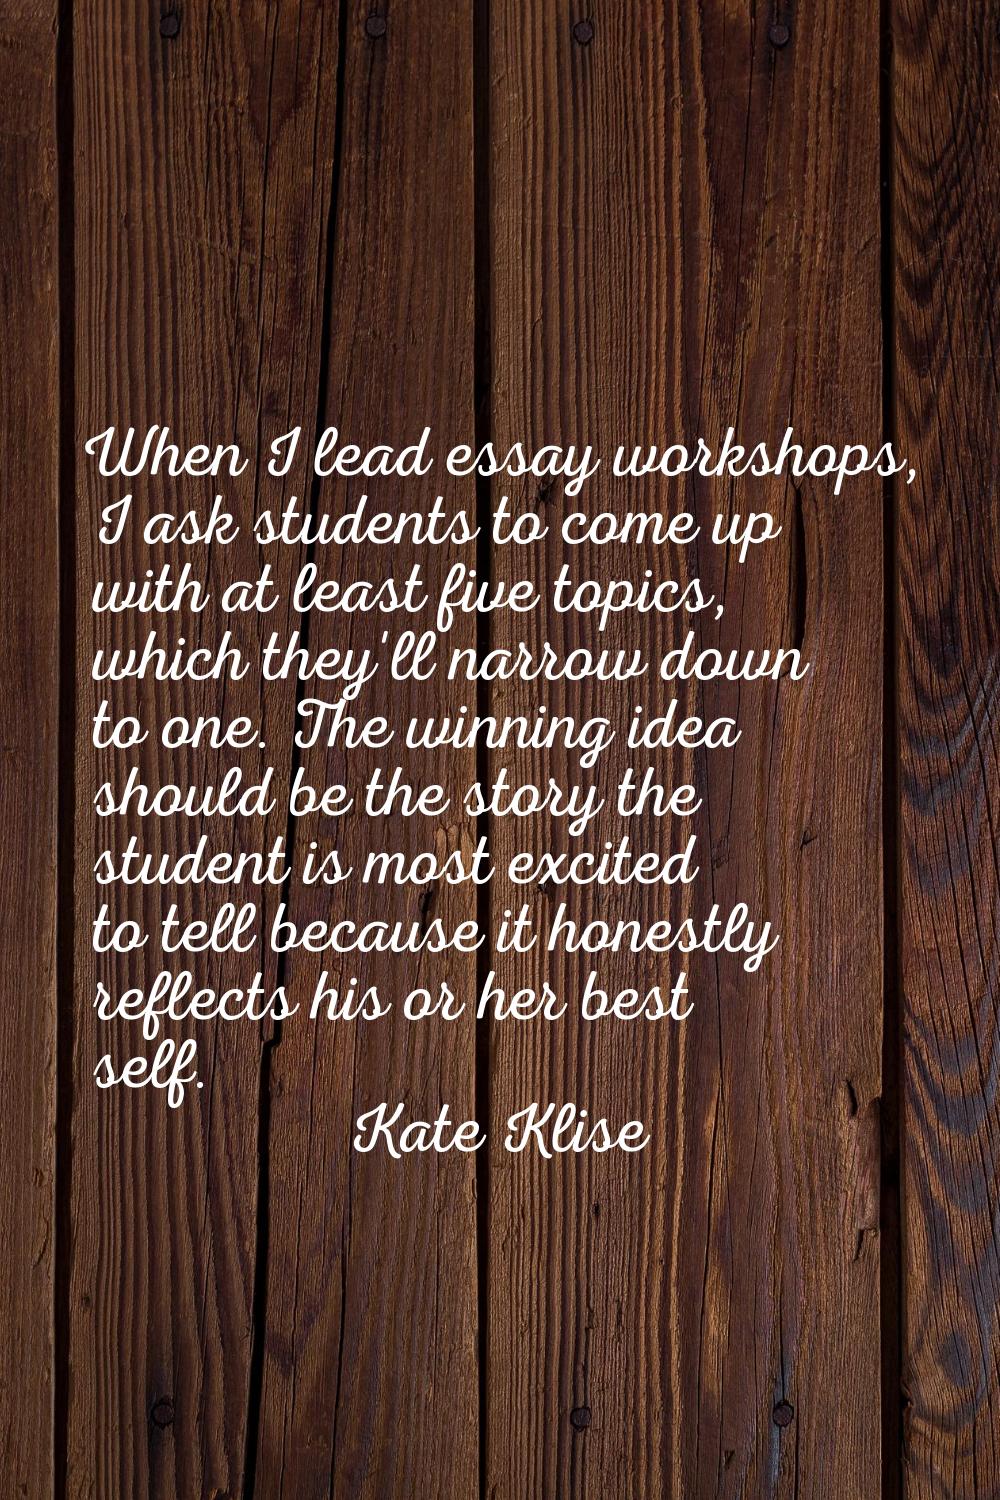 When I lead essay workshops, I ask students to come up with at least five topics, which they'll nar